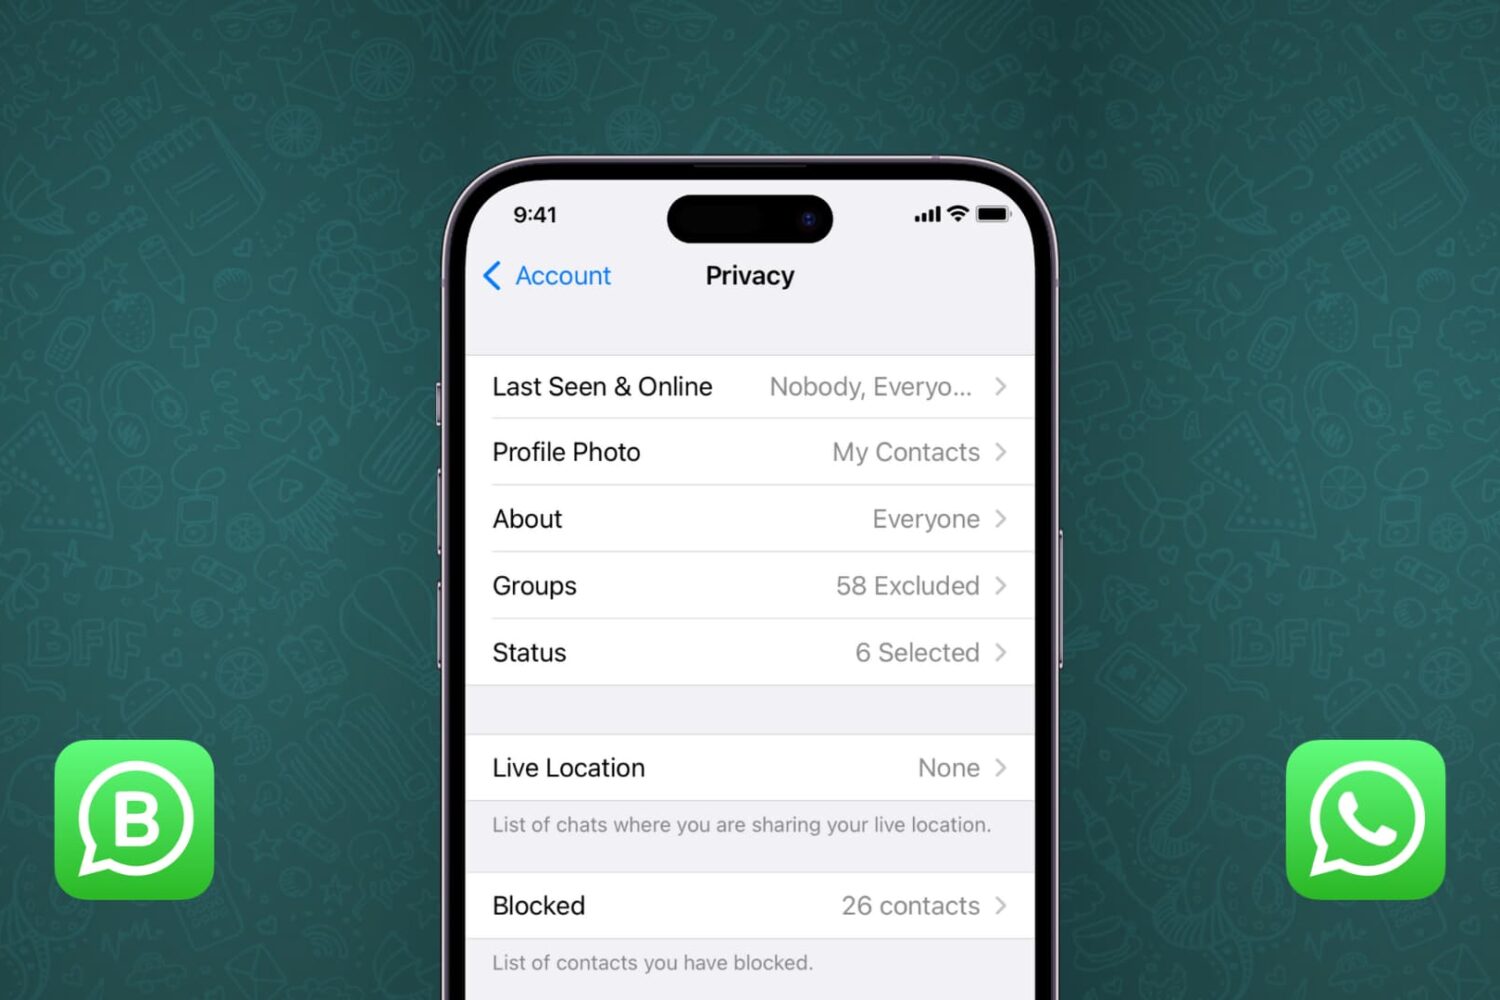 WhatsApp privacy settings on iPhones